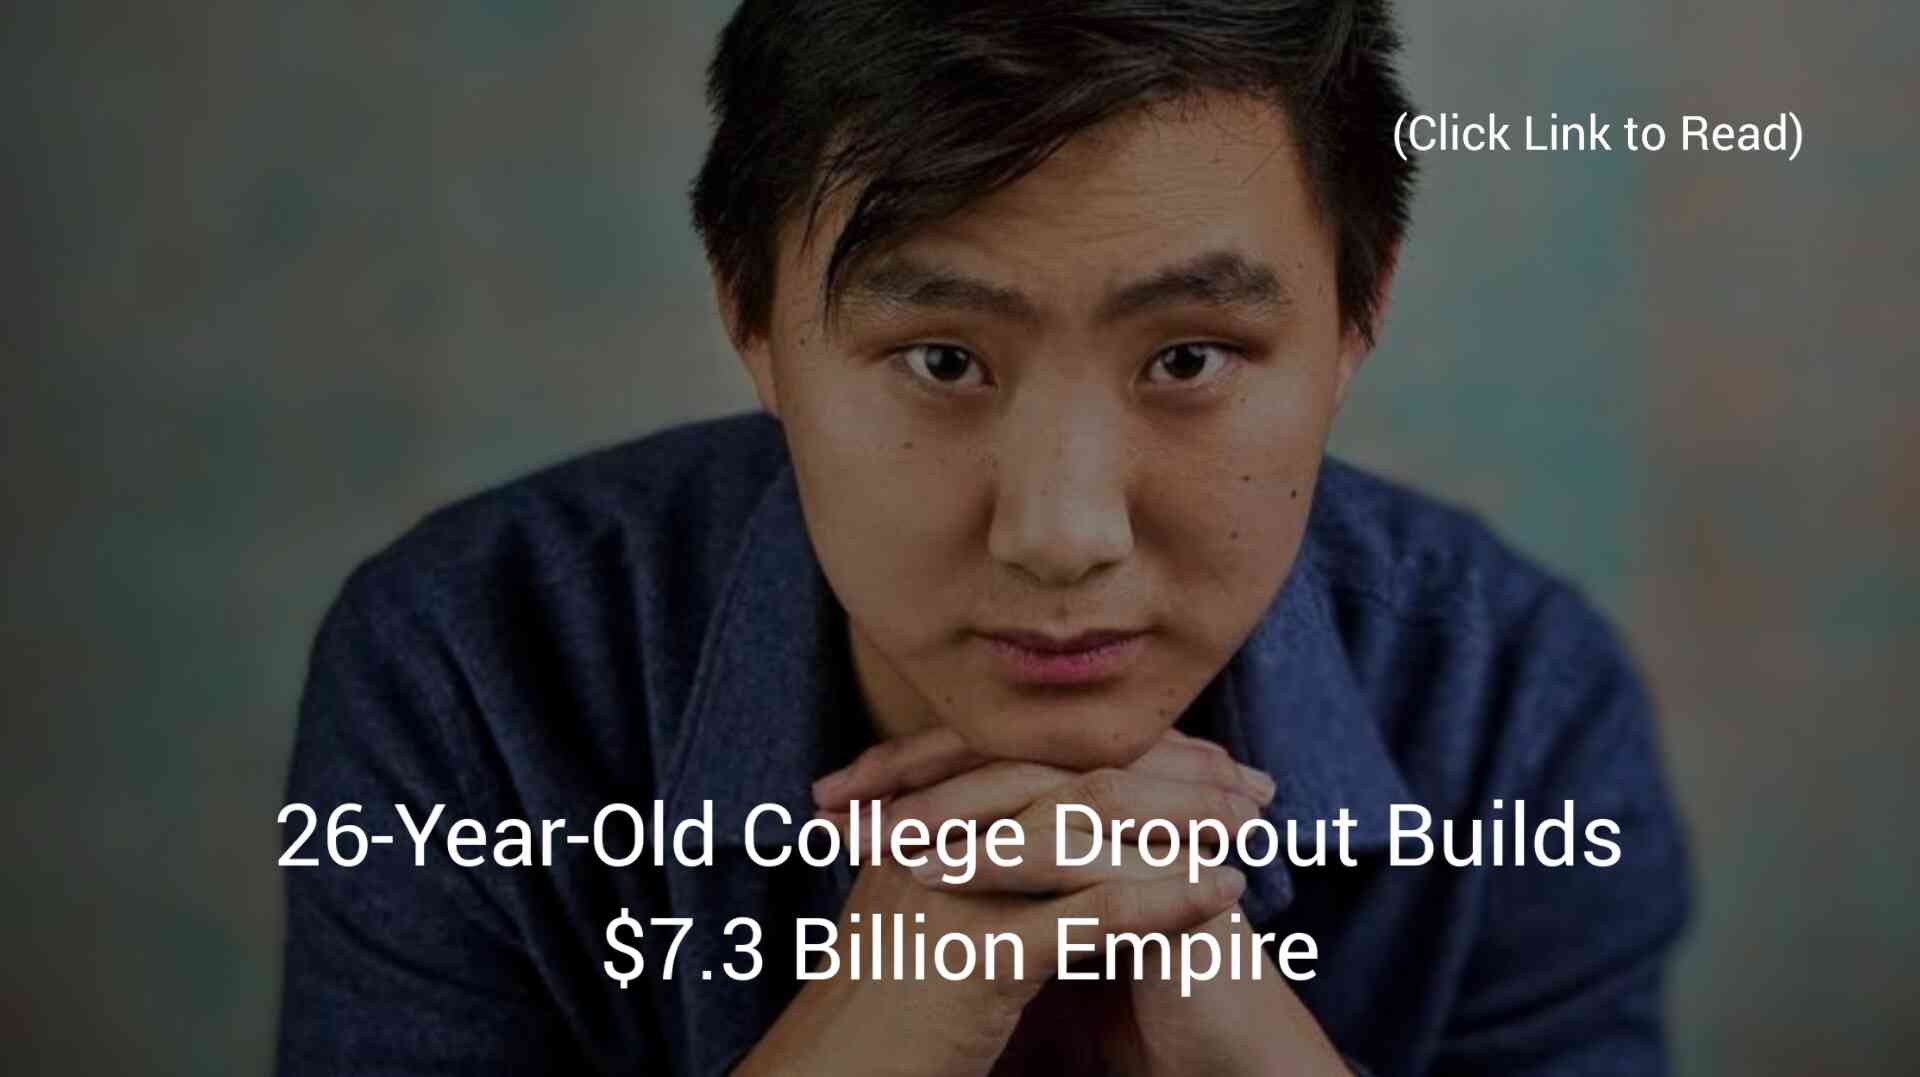 Referred to as the Next Elon Musk, 26-Year-Old College Dropout Builds $7.3 Billion Empire. - MirrorLog